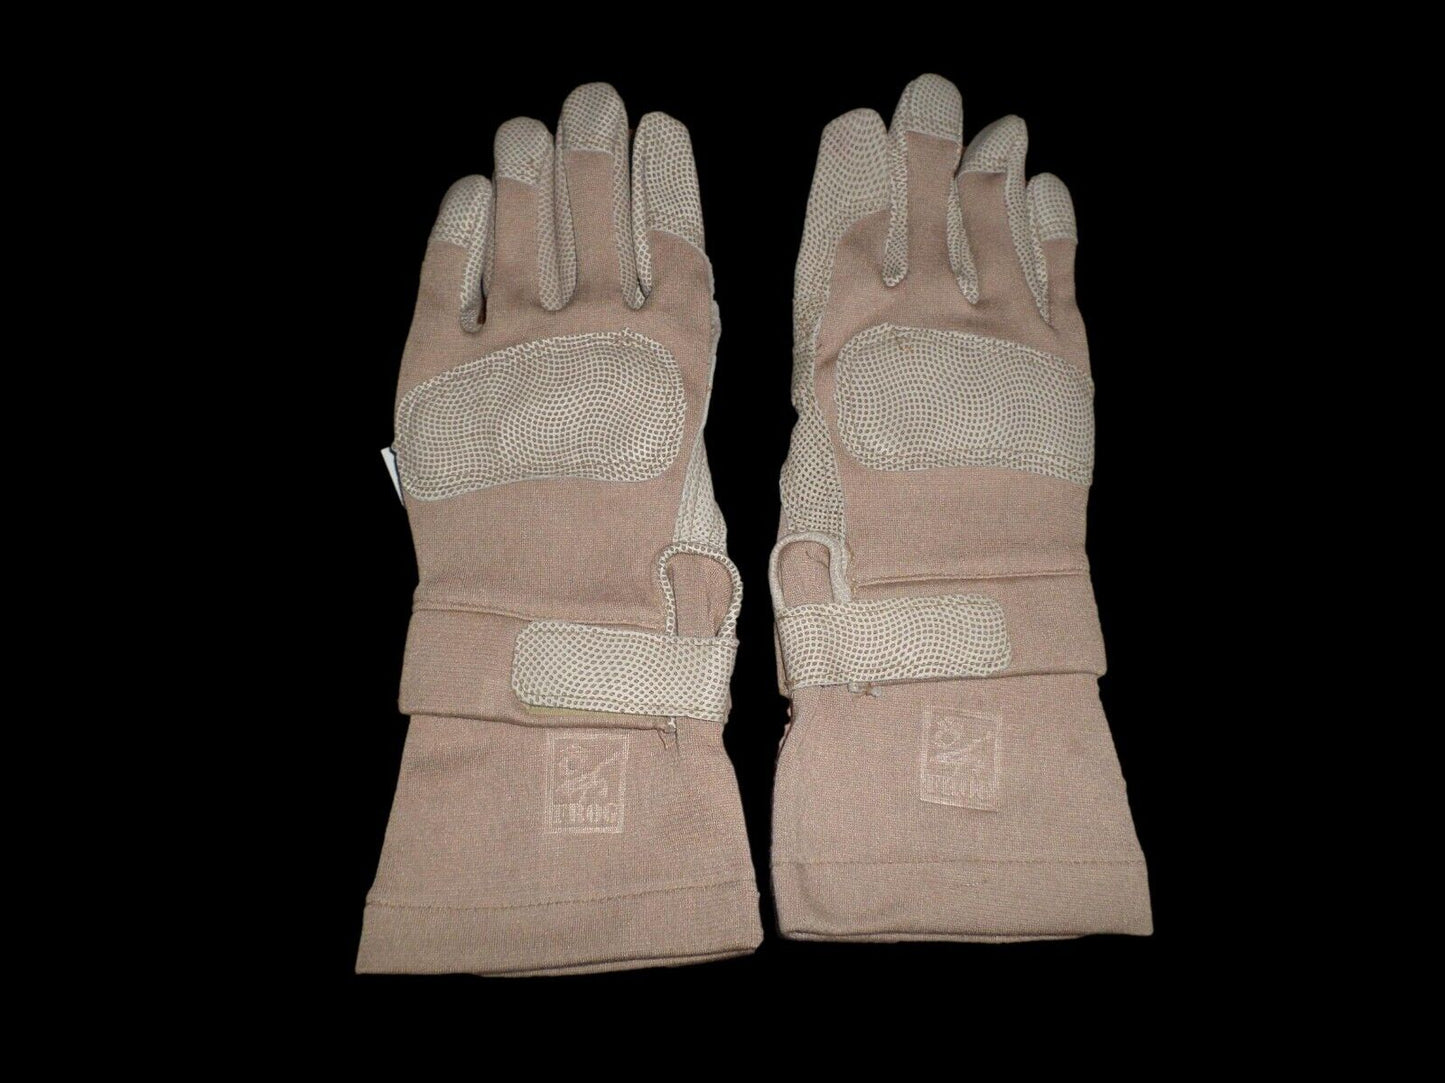 U.S MILITARY COMBAT GEC GLOVES ANSELL HAWKEYE FROG 46-409 ACTIVARMR TACTICAL USA